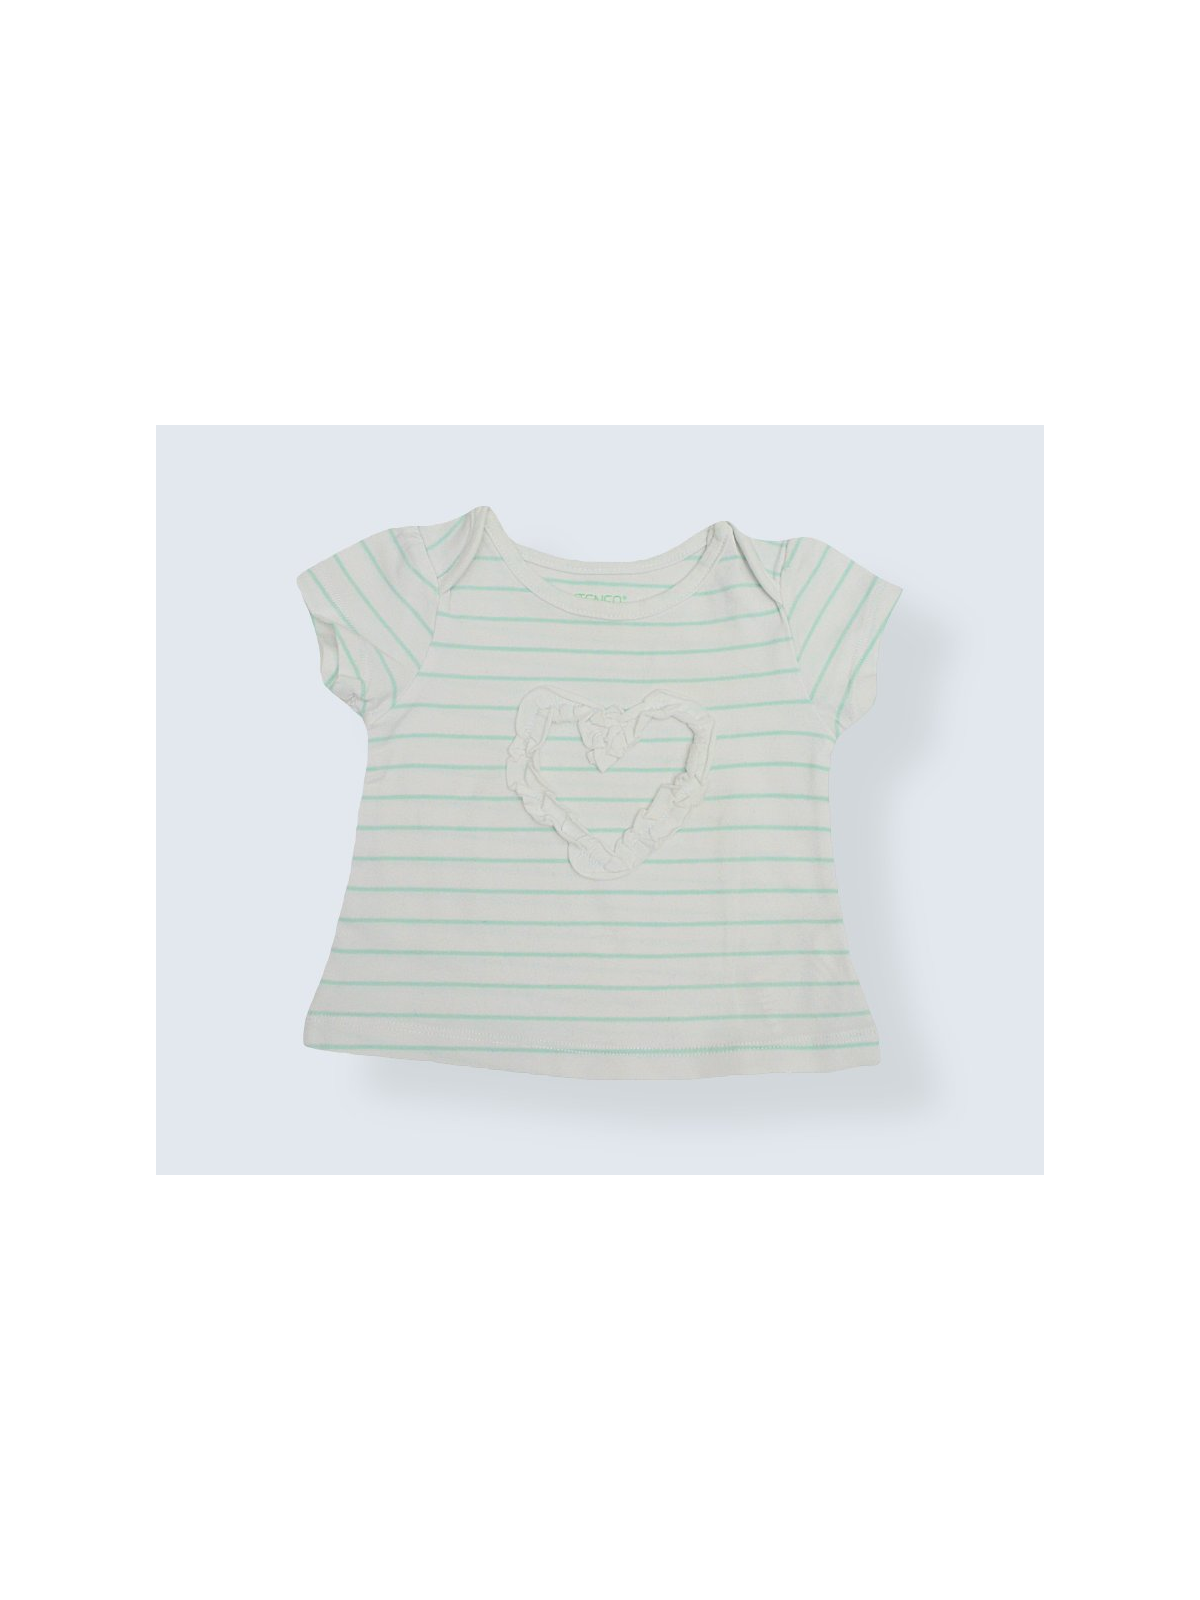 T-Shirt d'occasion In Extenso 3 Mois pour fille.